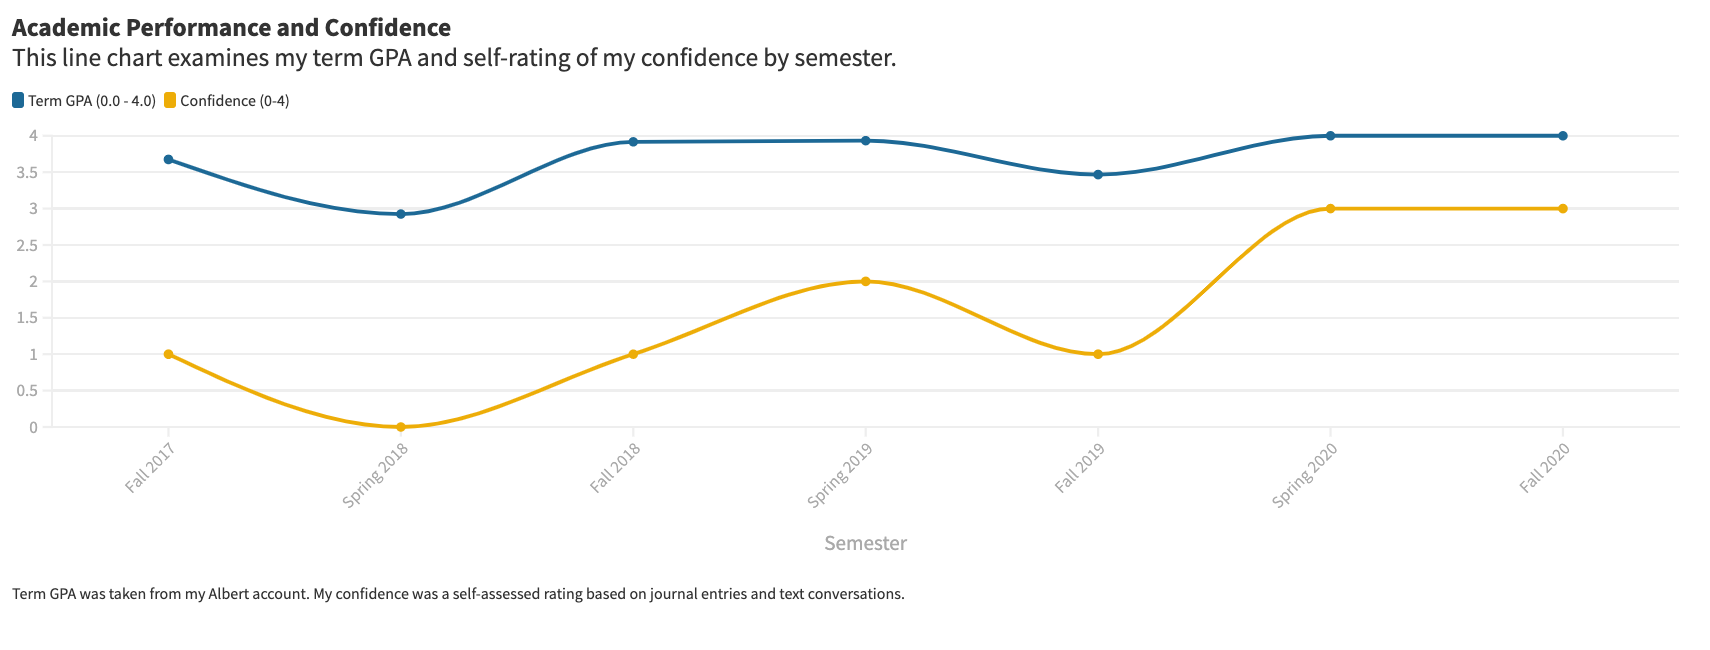 line chart of academic performance and self-confidence